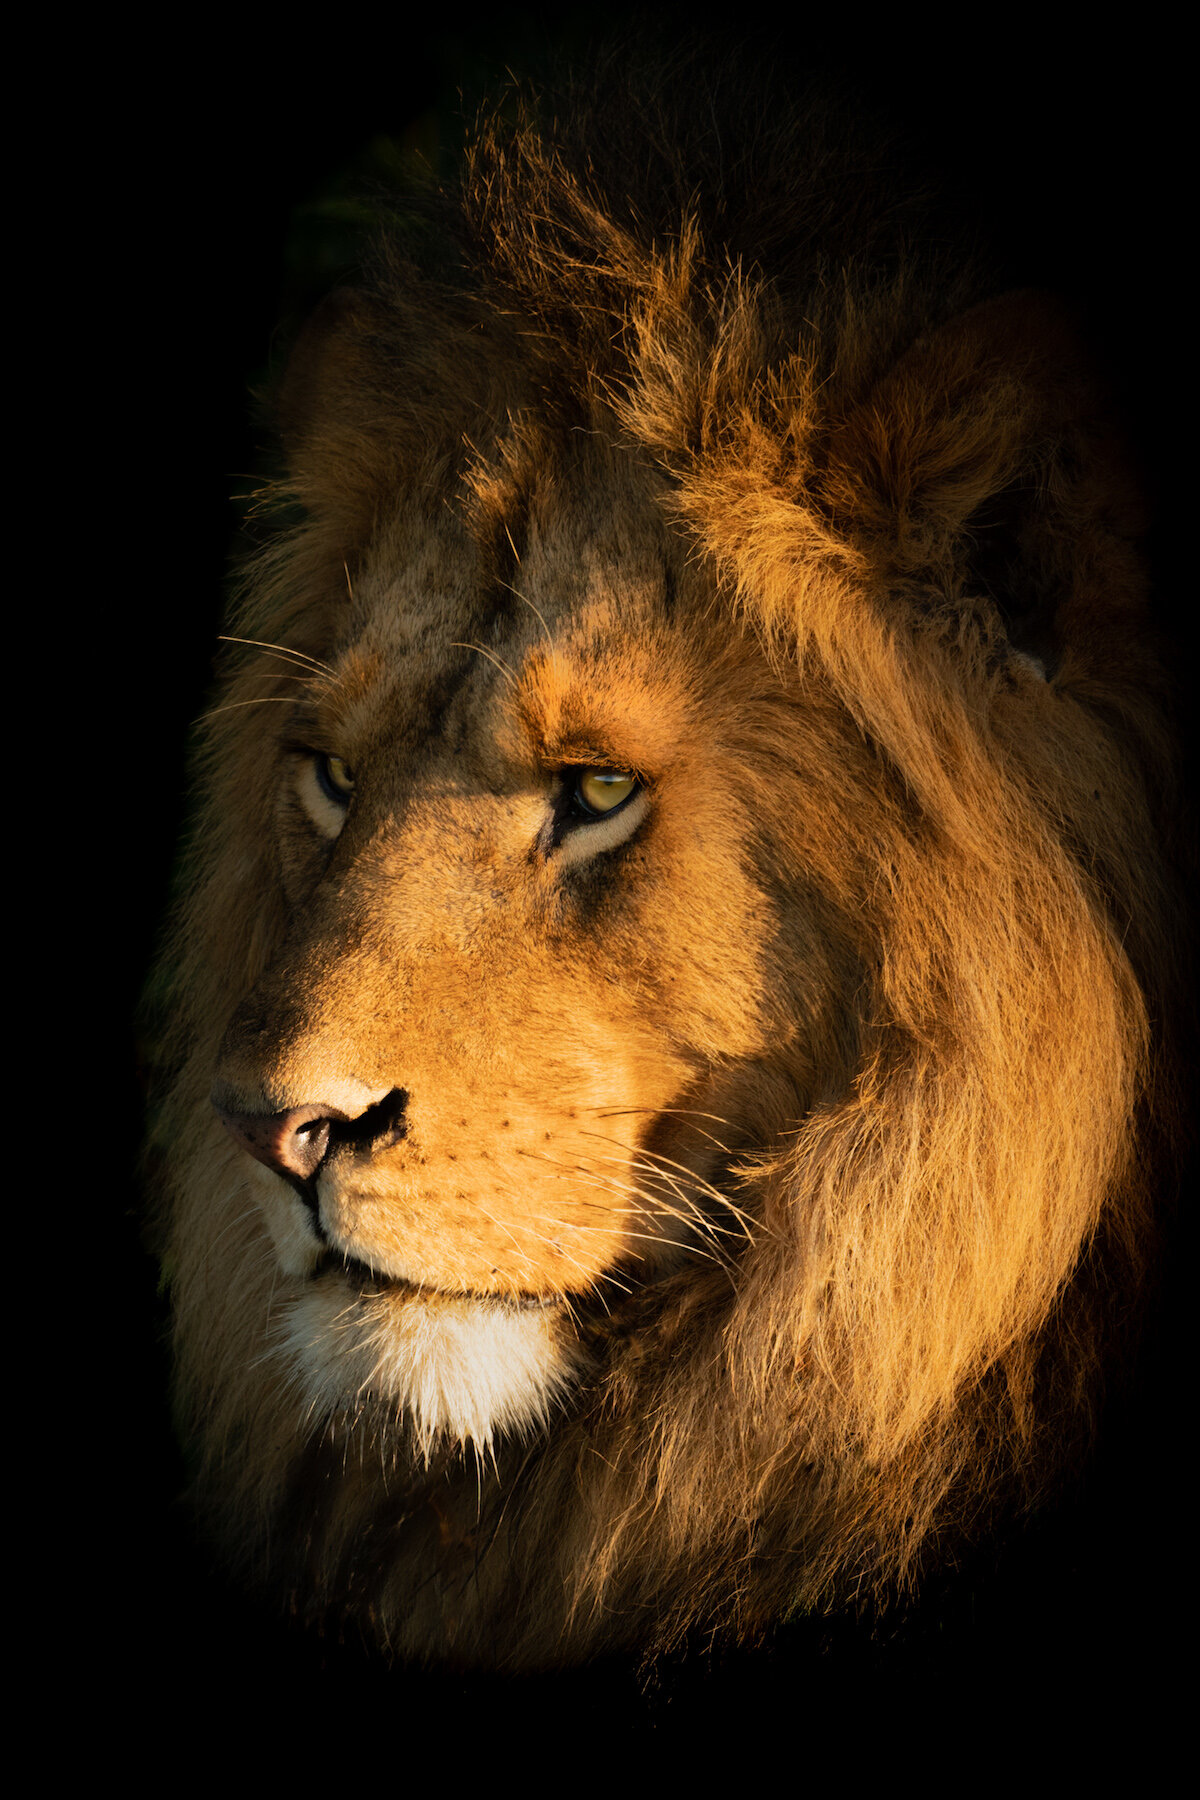 Close-up of male lion face in shadows.jpg